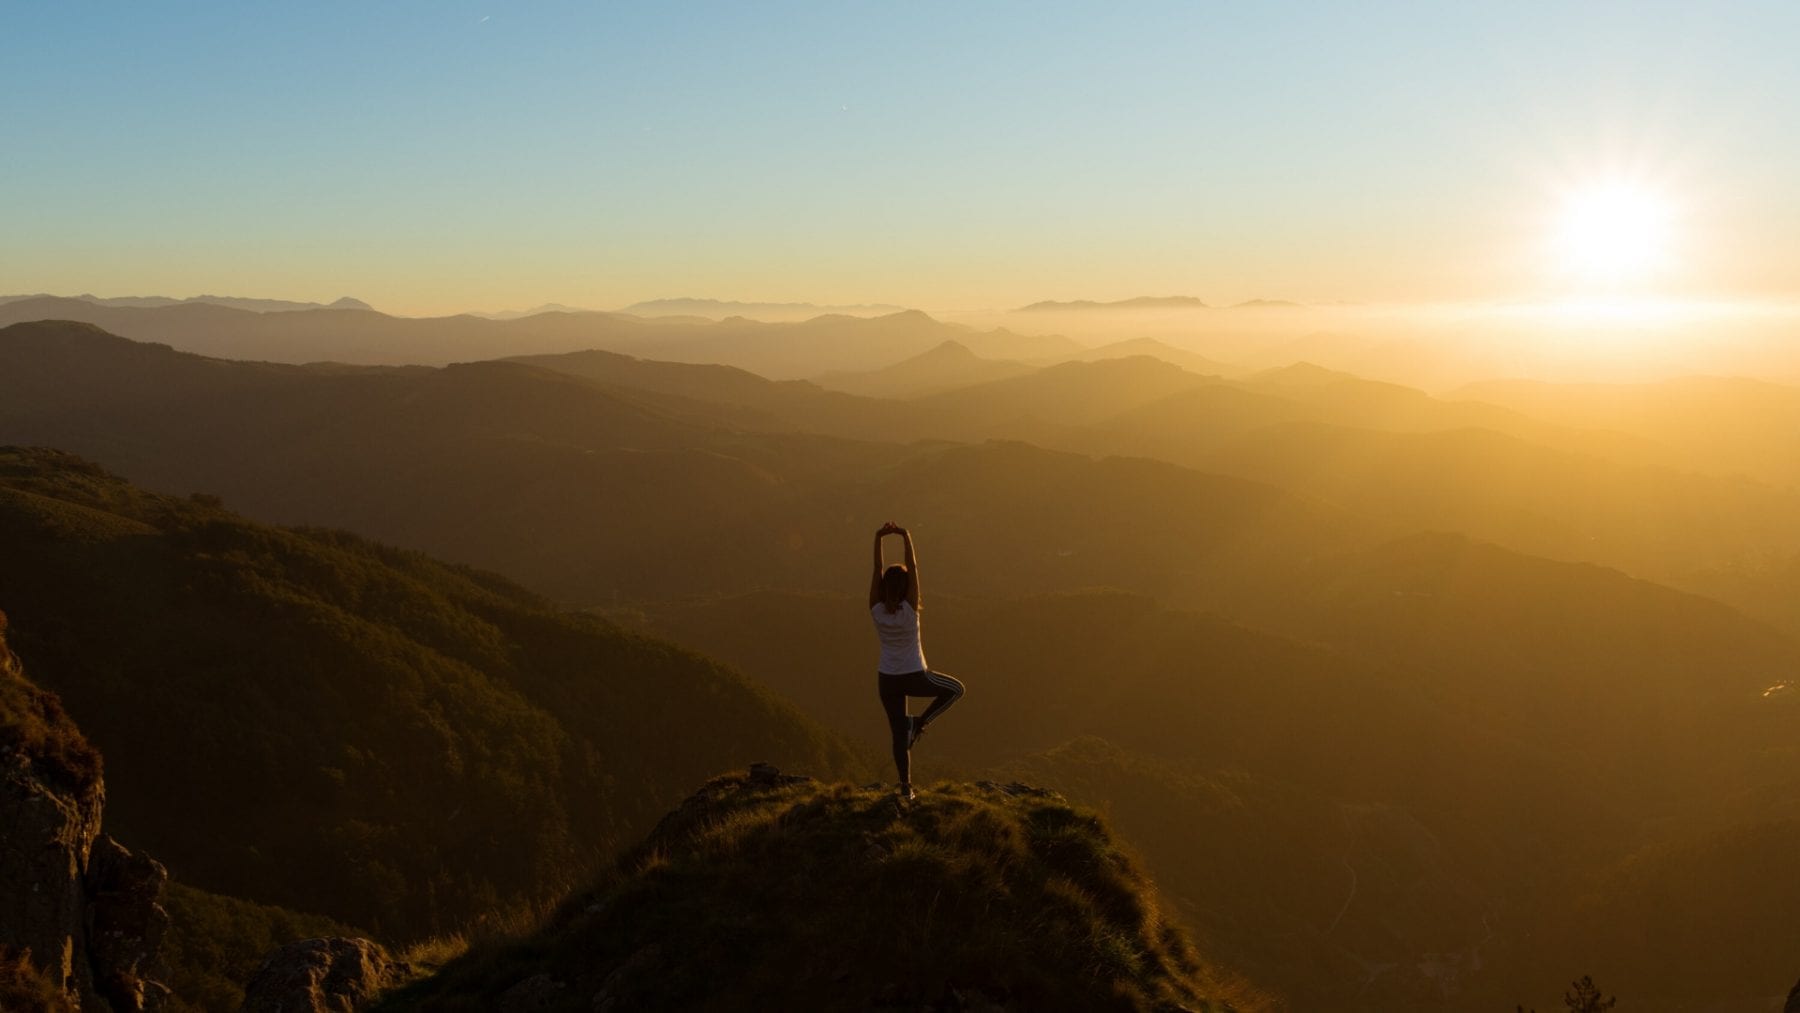 A person doing yoga on a mountain at sunset